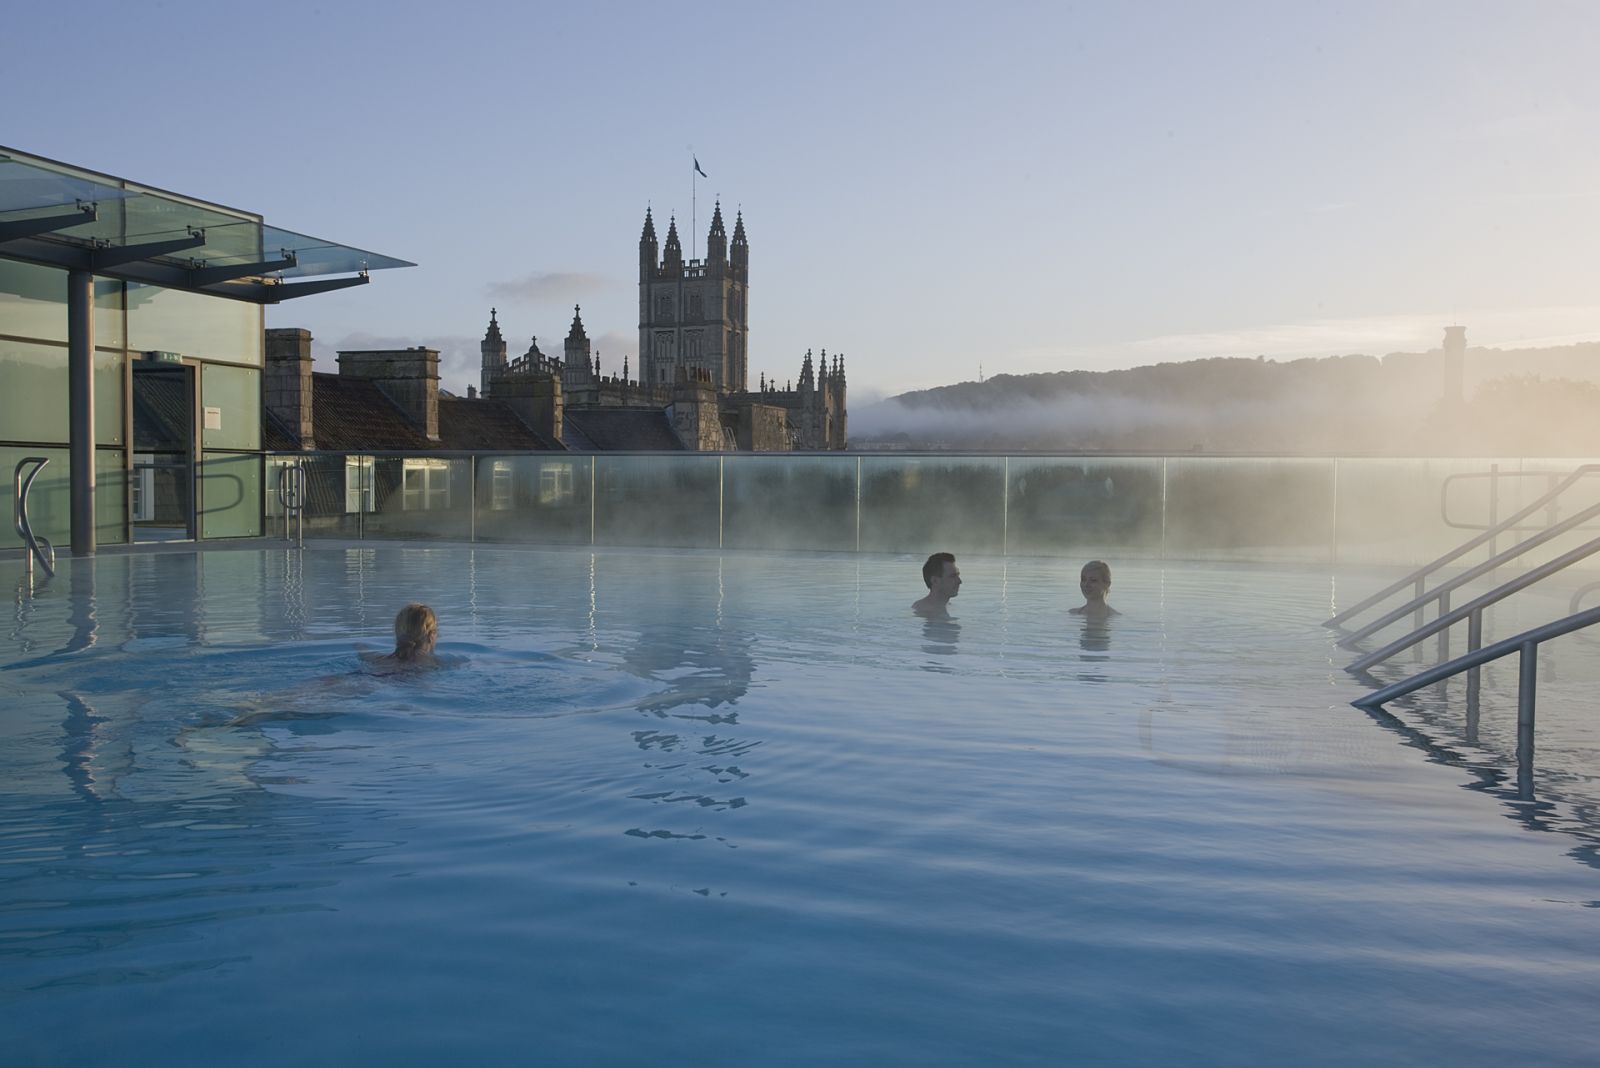 Rooftop pool at the Thermae Bath Spa